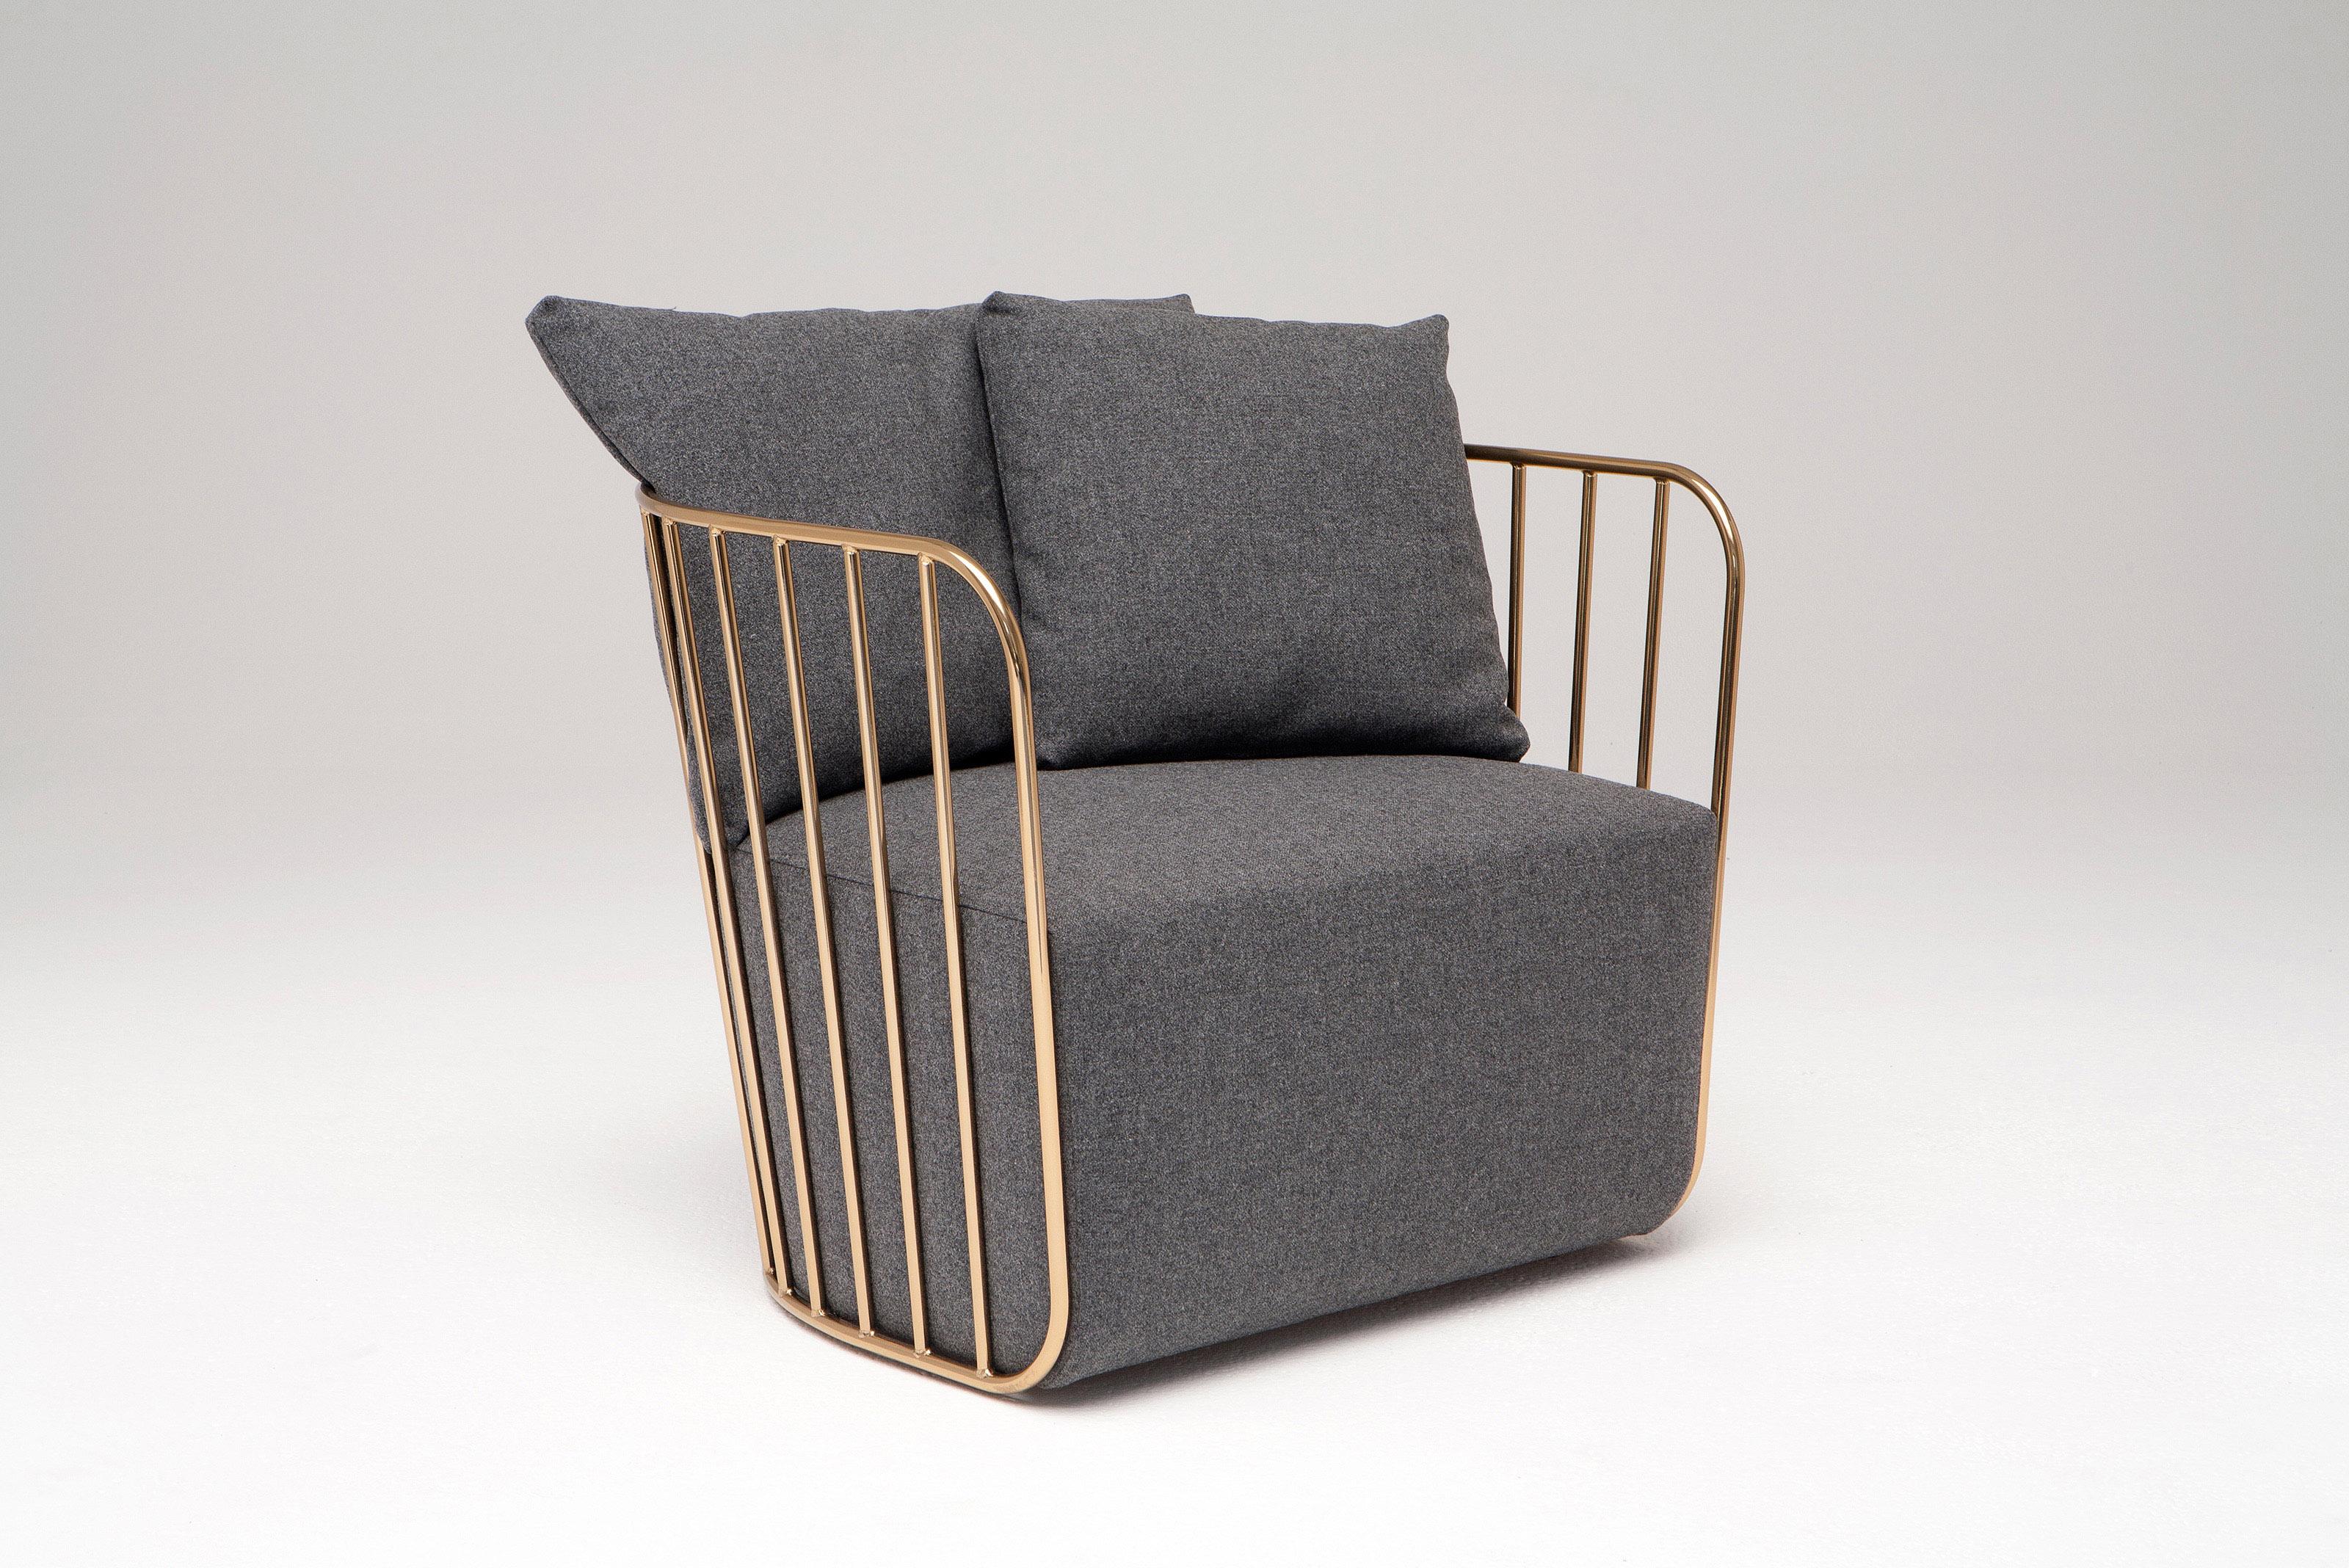 Bride’s Veil Static Chair by Phase Design
Dimensions: D 75 x W 83,2 x H 68,6 cm.
Materials: Upholstery, steel and smoked brass.

Solid steel bar available in a smoked brass, polished chrome, burnt copper, or powder coat finish with upholstery and